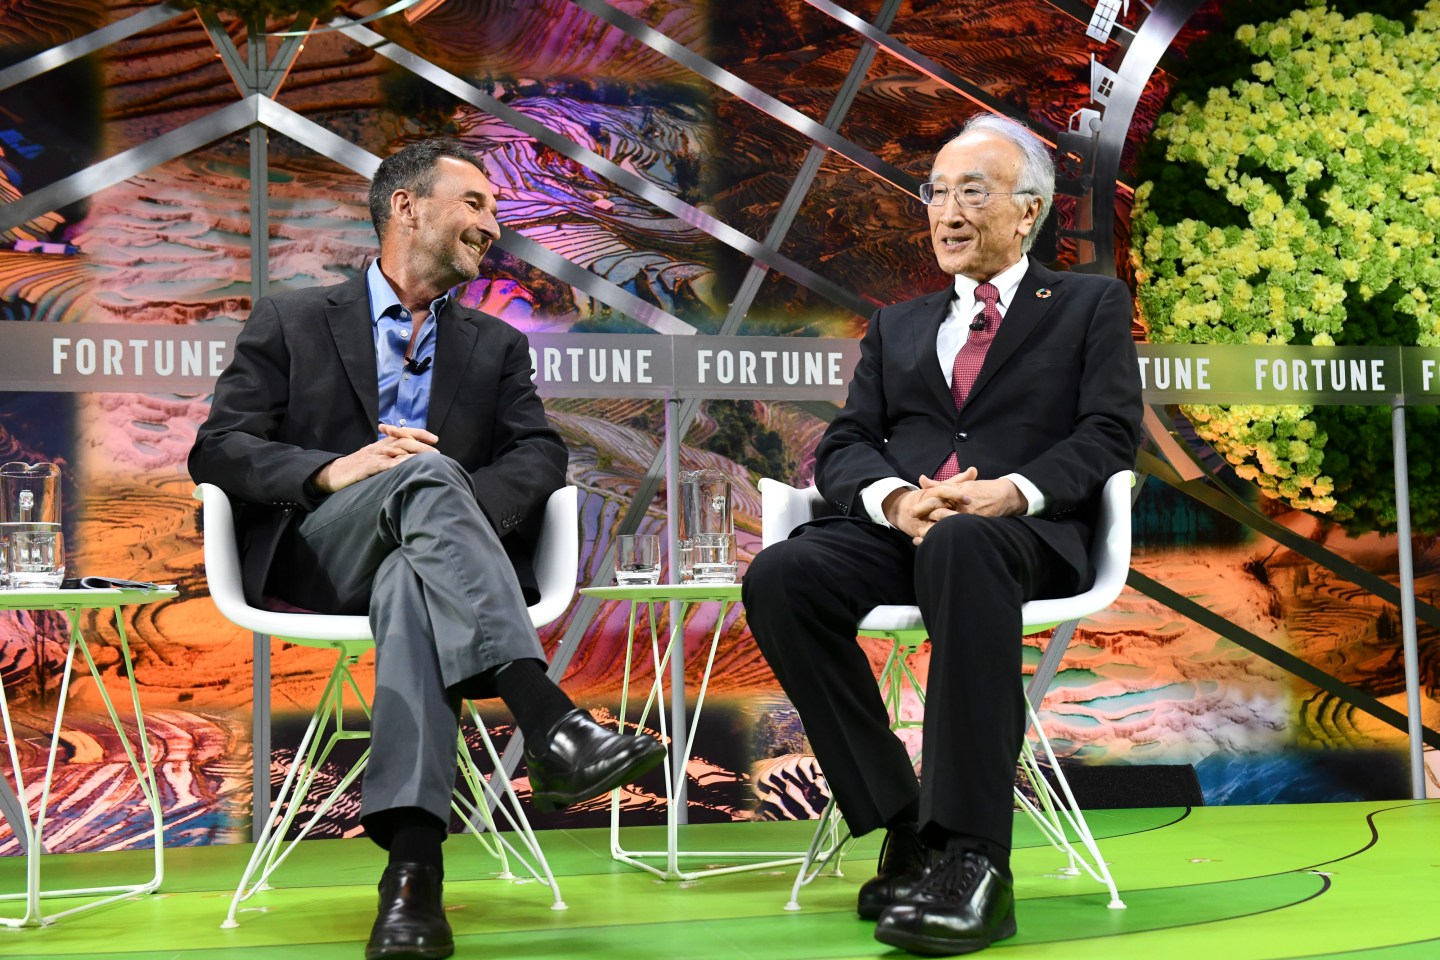 029 Fortune Global Sustainability Forum 2019 Thursday, September 5th, 2019 Yunnan, China 4:00pm-4:10pm JOINT Q&amp;A: ENERGY AND CLIMATE Hal Harvey, Chief Executive Officer, Energy Innovation Nobuo Tanaka, Chairman, Sasakawa Peace Foundation; Former Executive Director, International Energy Agency Moderator: Clay Chandler, FORTUNE Photograph by Stefen Chow/Fortune